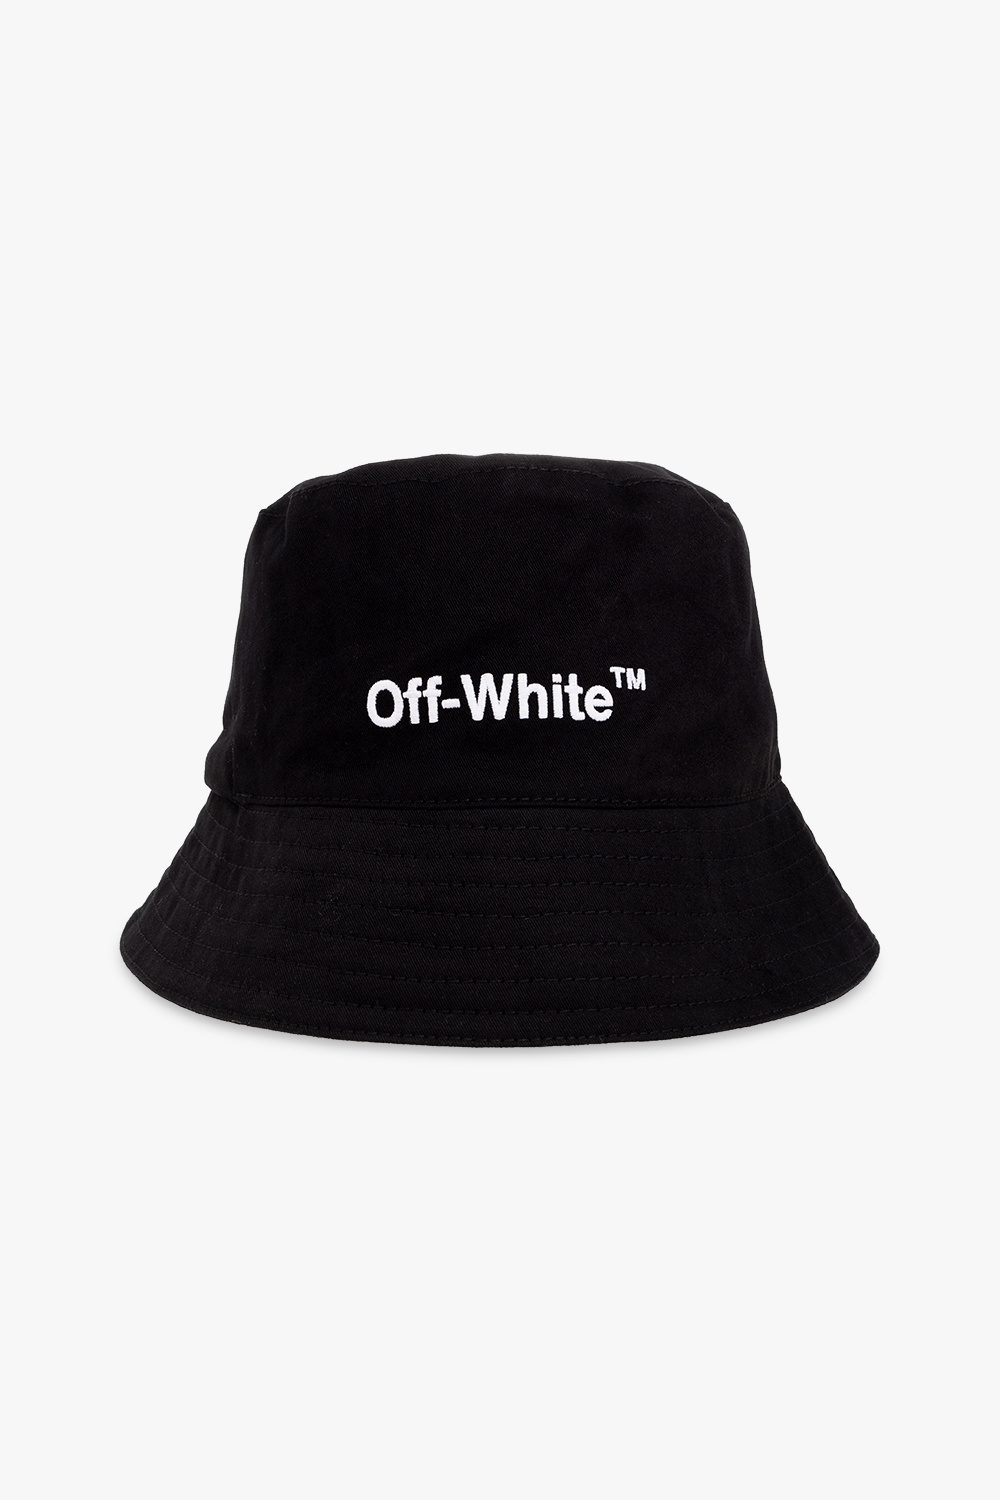 Off-White usb Silver wallets clothing shoe-care men caps Shorts